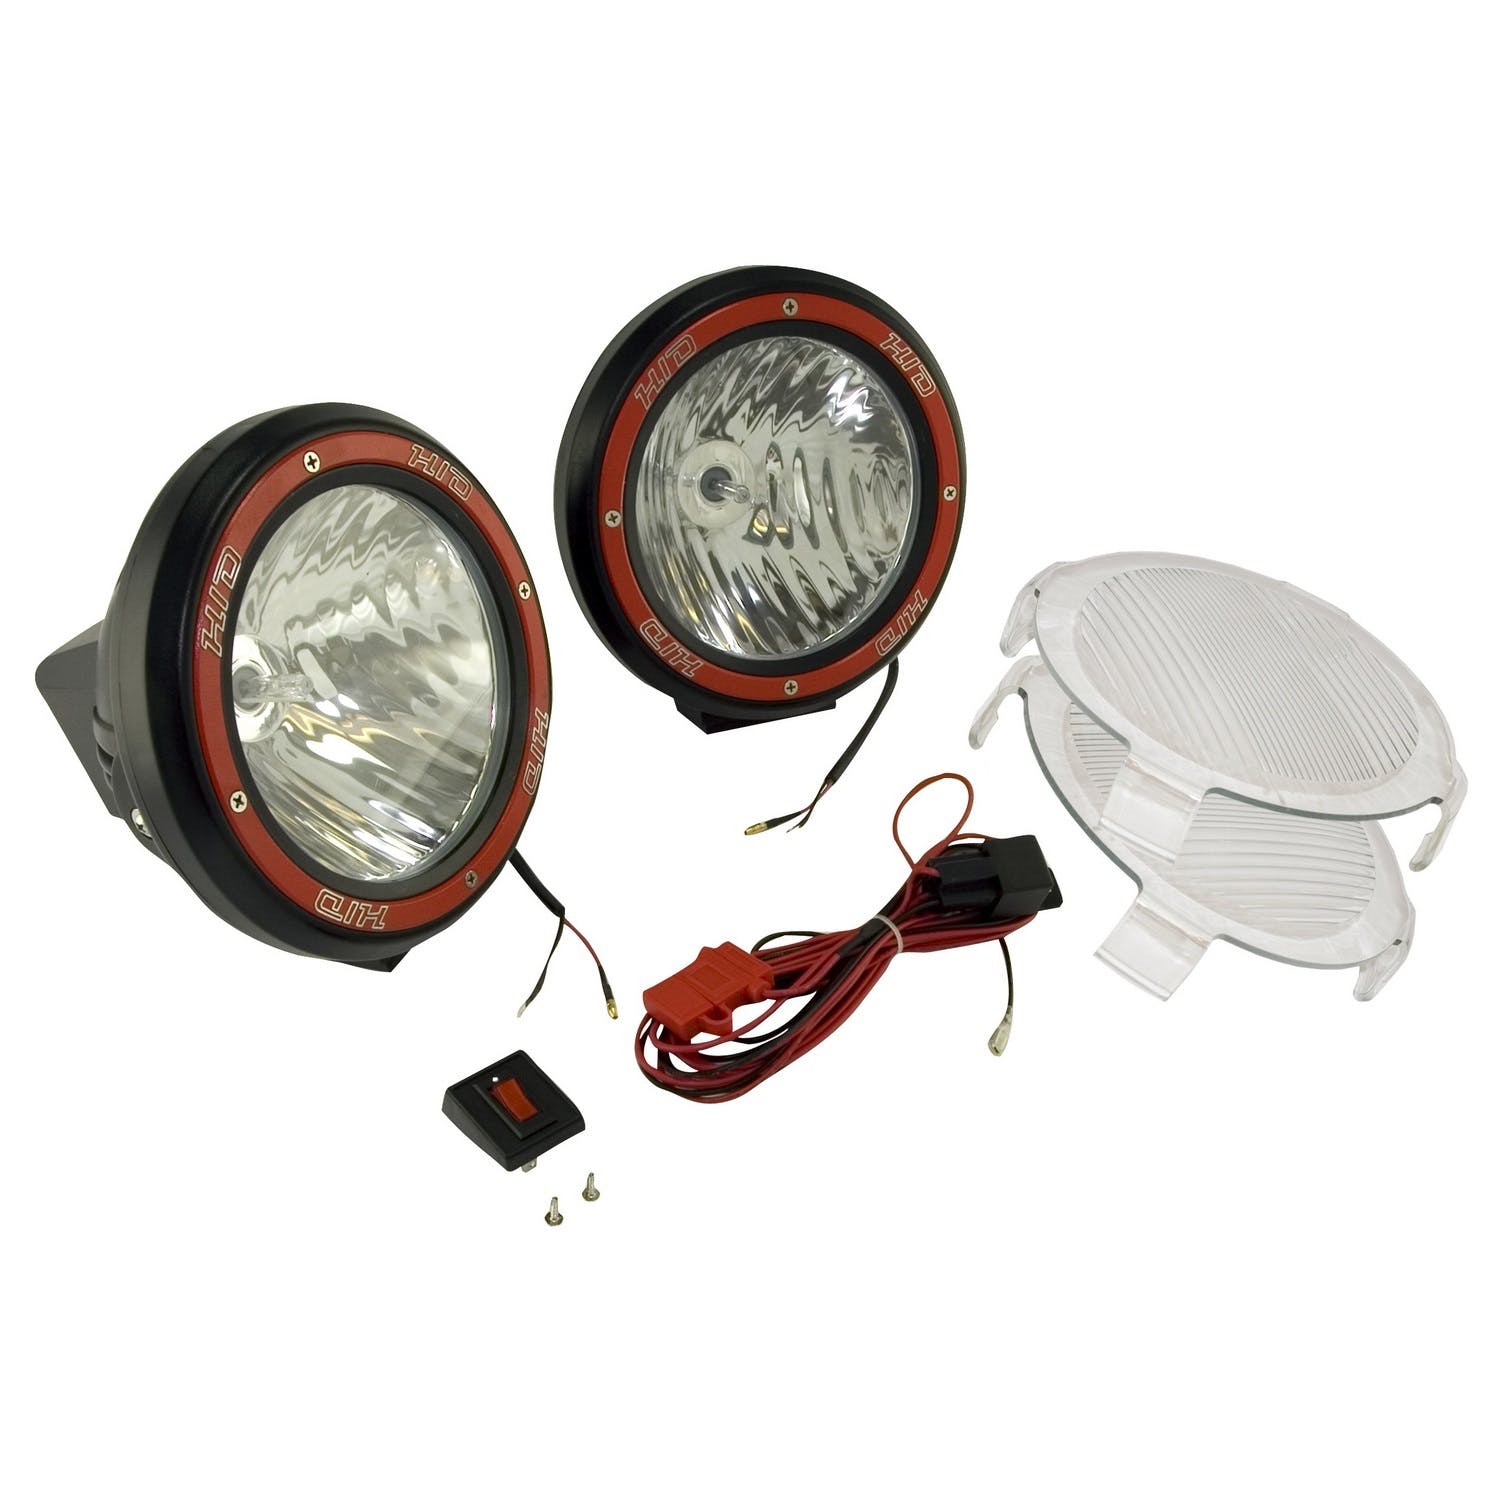 Rugged Ridge 15205.54 5-In Round HID Offroad Light Kit